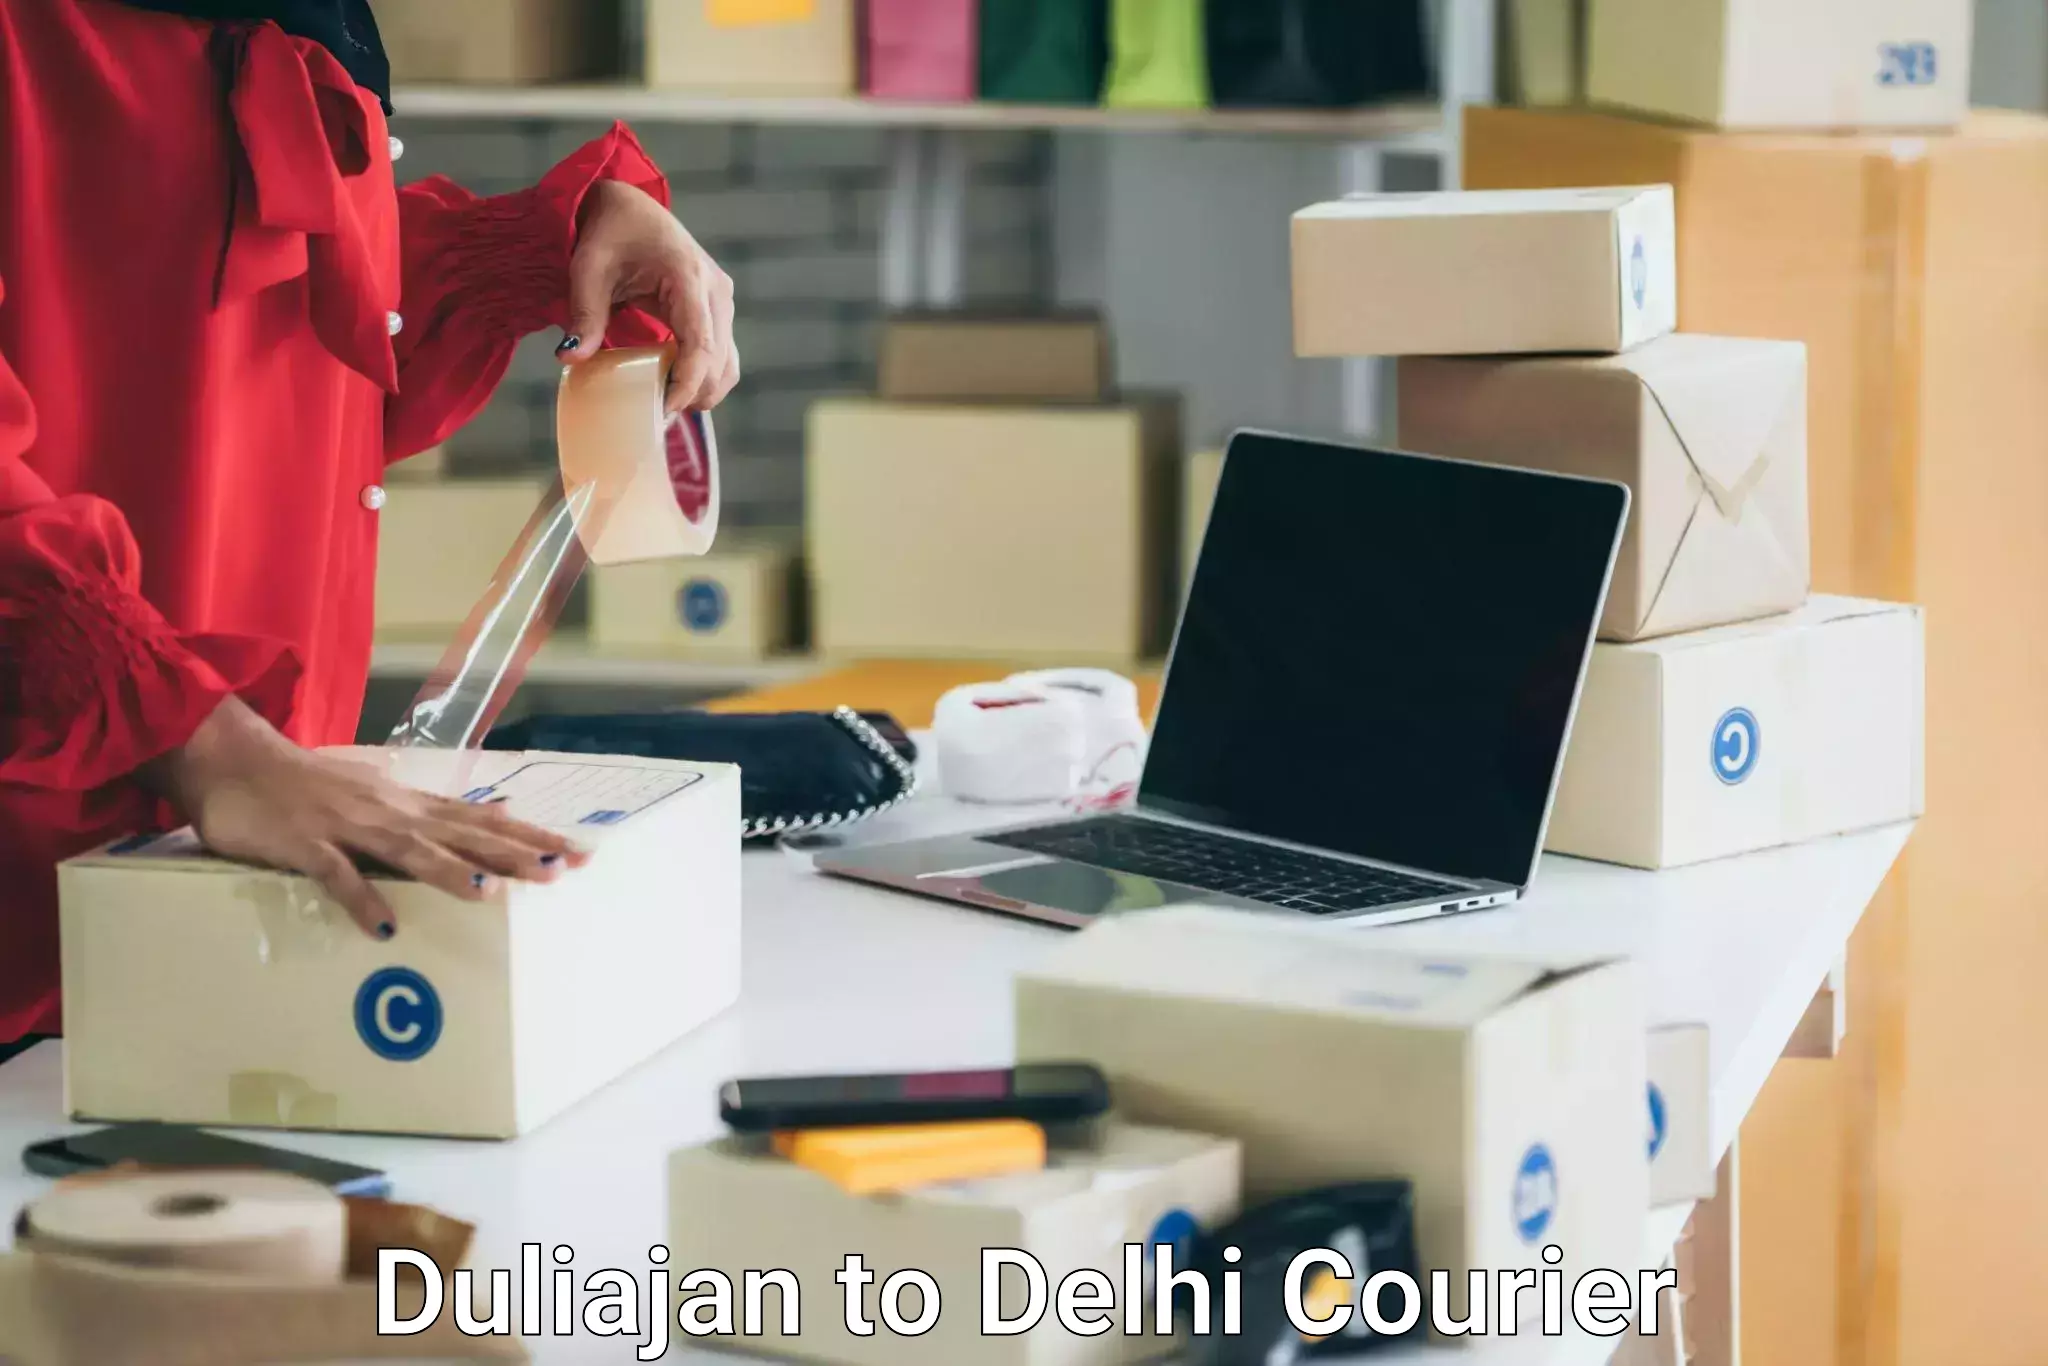 Furniture delivery service Duliajan to NCR